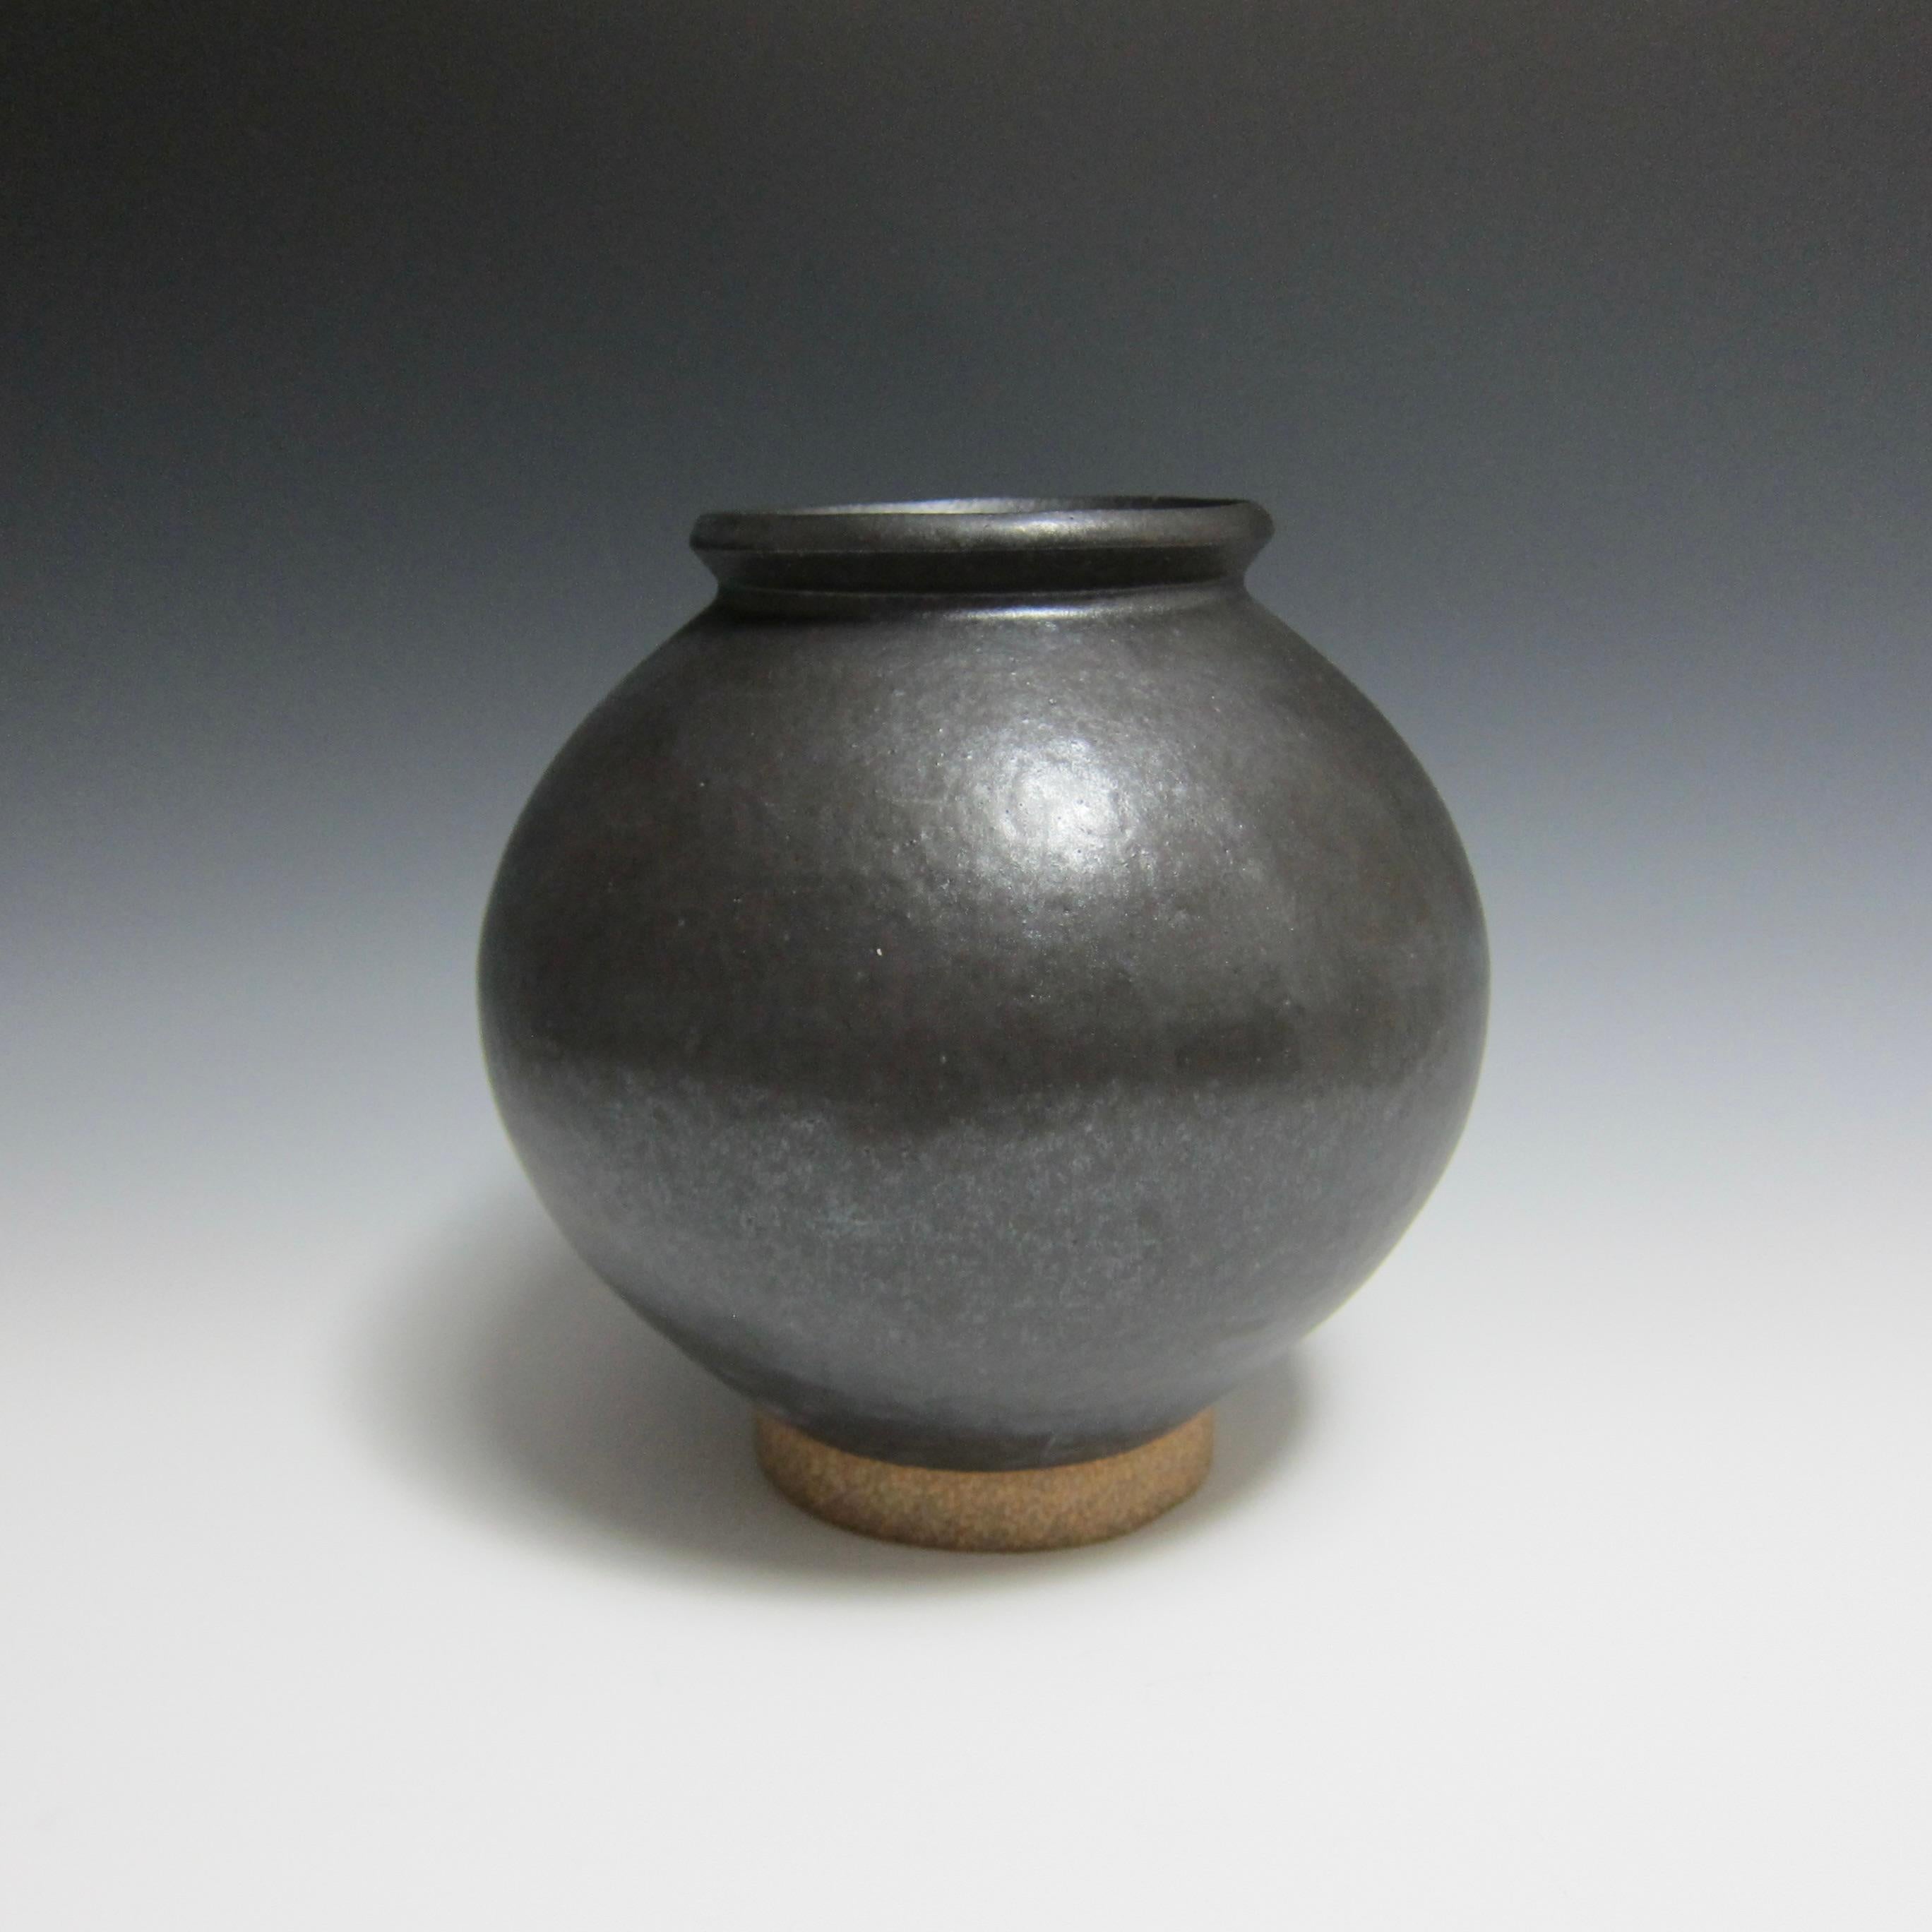 Wheel thrown moon jar by Jason Fox.

Largely influenced by Korean Pottery, American contemporary ceramic artist Jason Fox shows his love for the rich history of Moon Jars with this piece.

